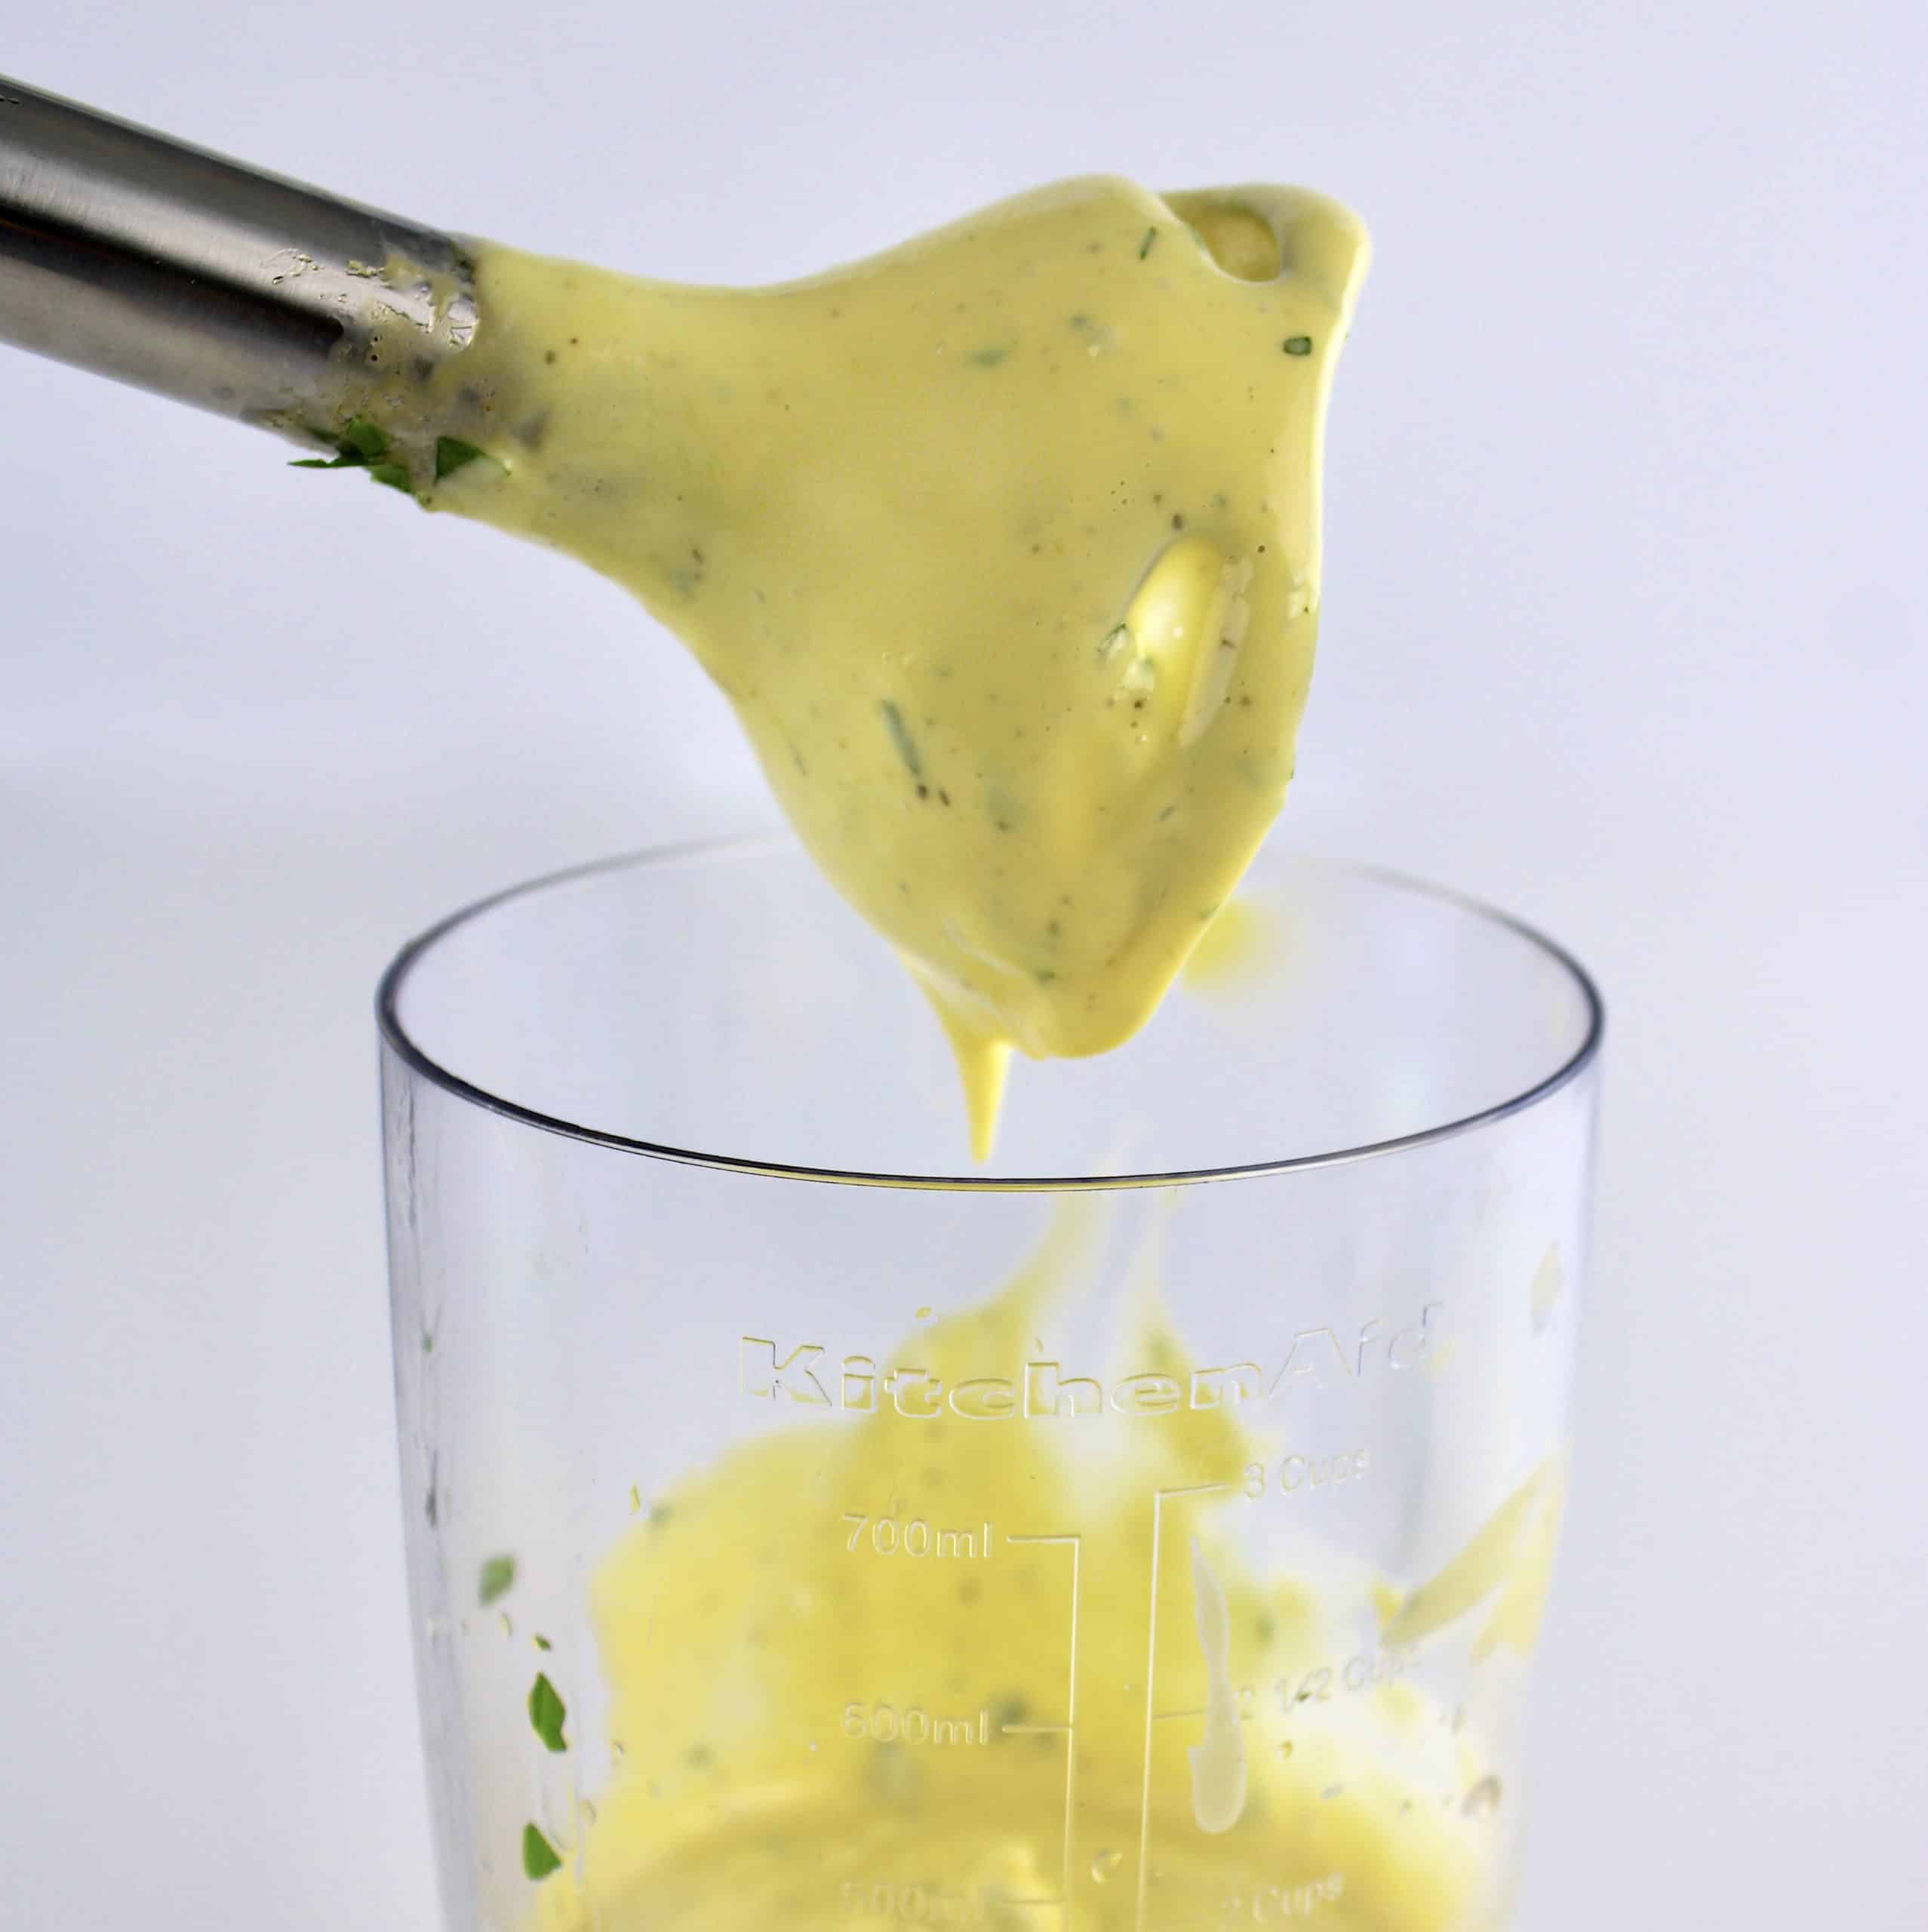 Béarnaise sauce dripping off immersion blender stick